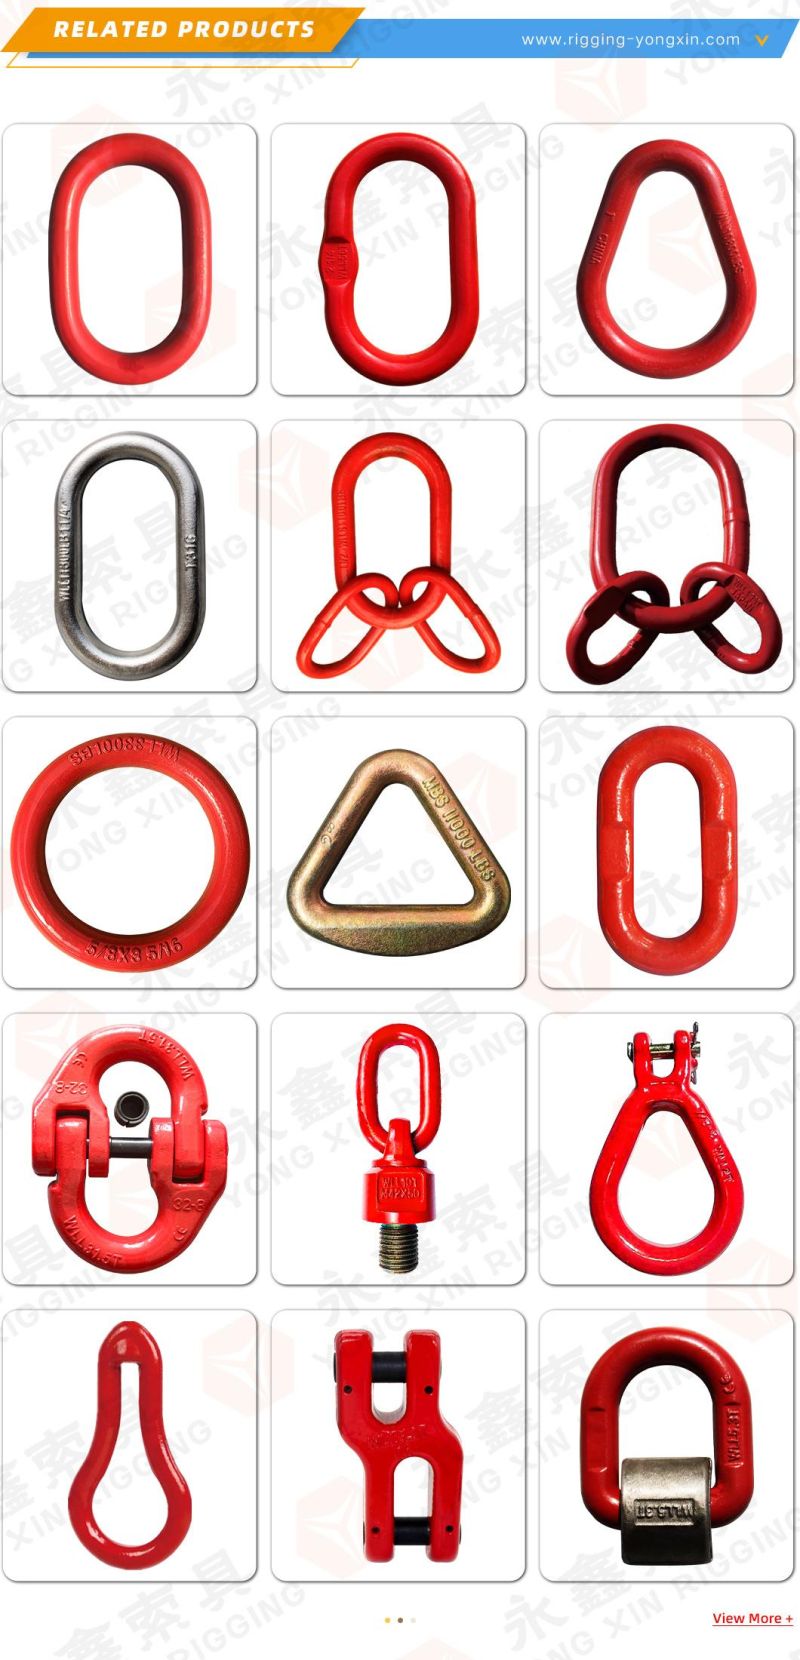 Hot Sale Quality Forged Rigging G100/G80 Multi Master Link for Chain Sling Assembly